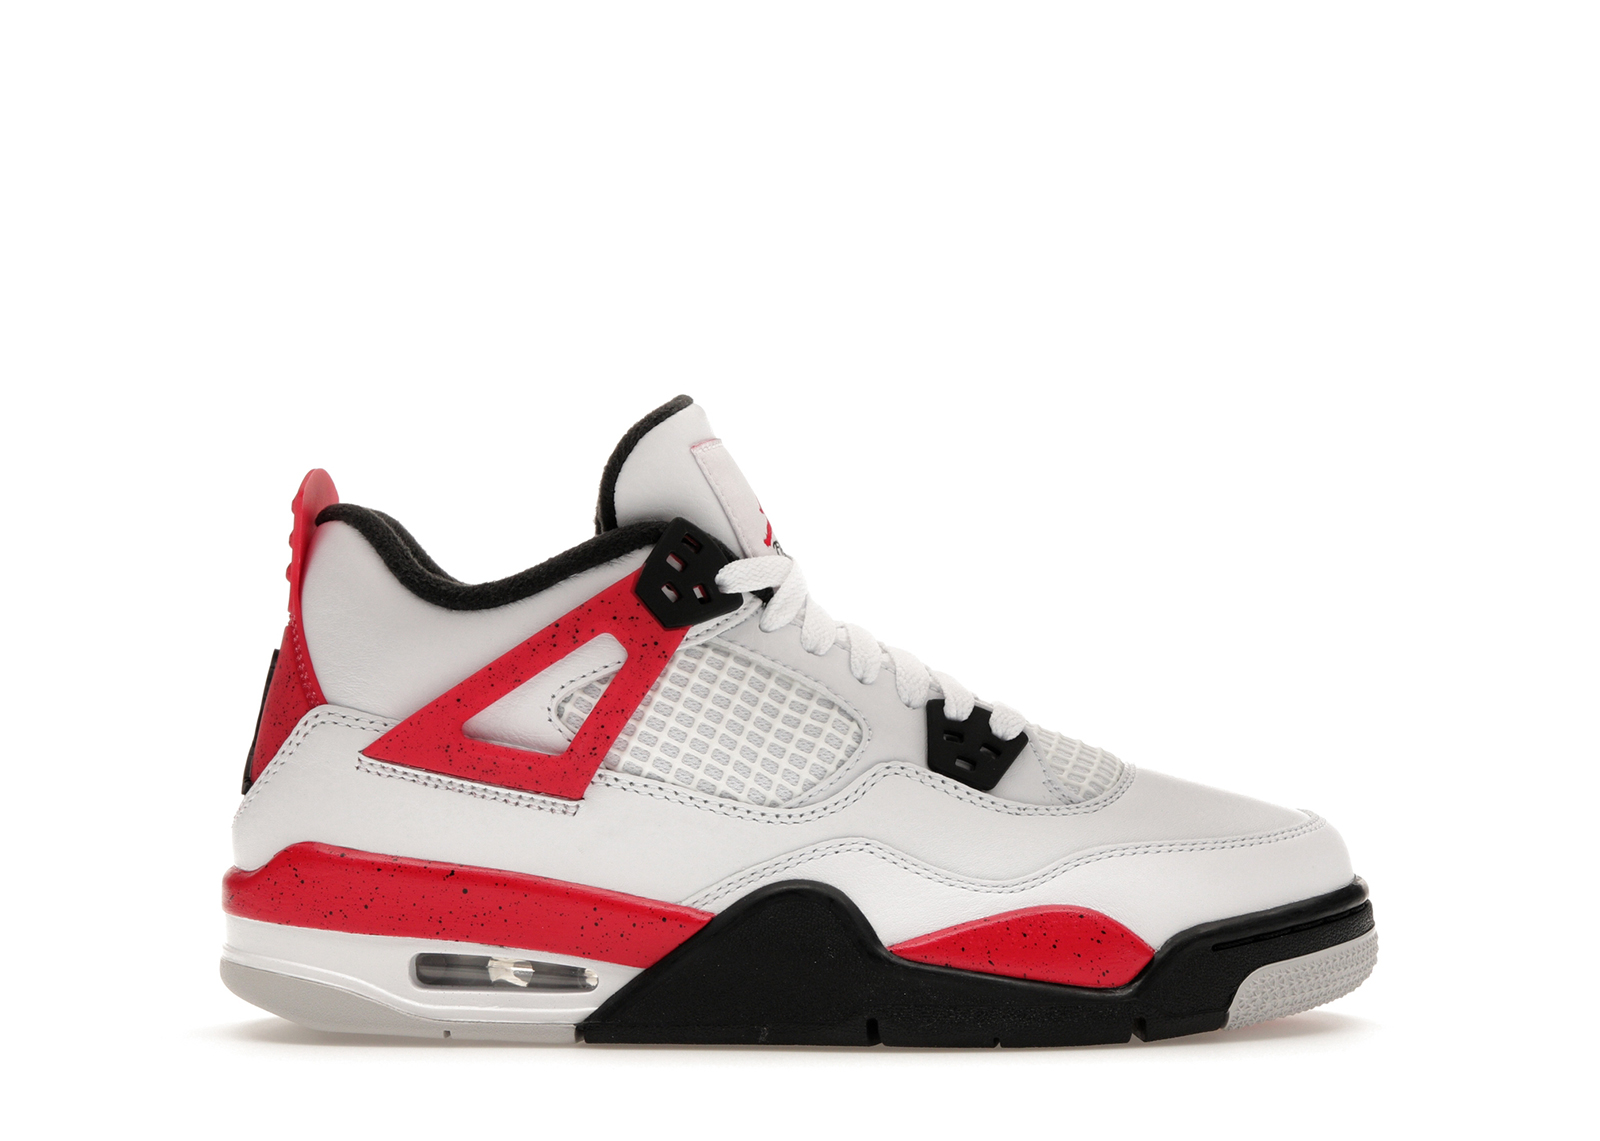 Jordan Shoes, Clothing & Accessories | SNIPES USA